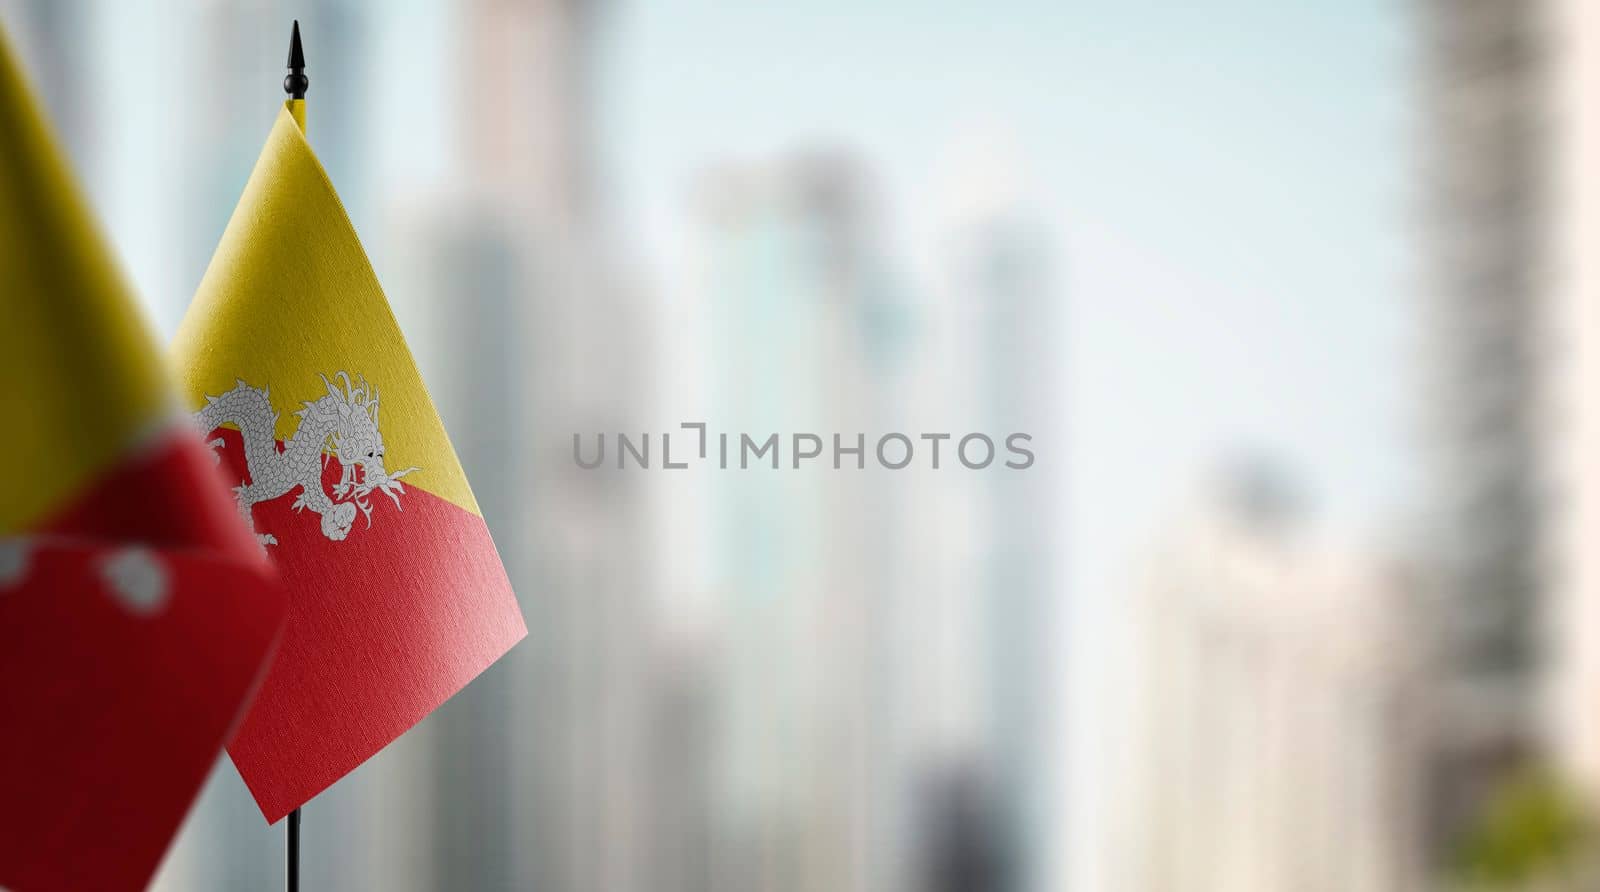 Small flags of the Bhutan on an abstract blurry background by butenkow